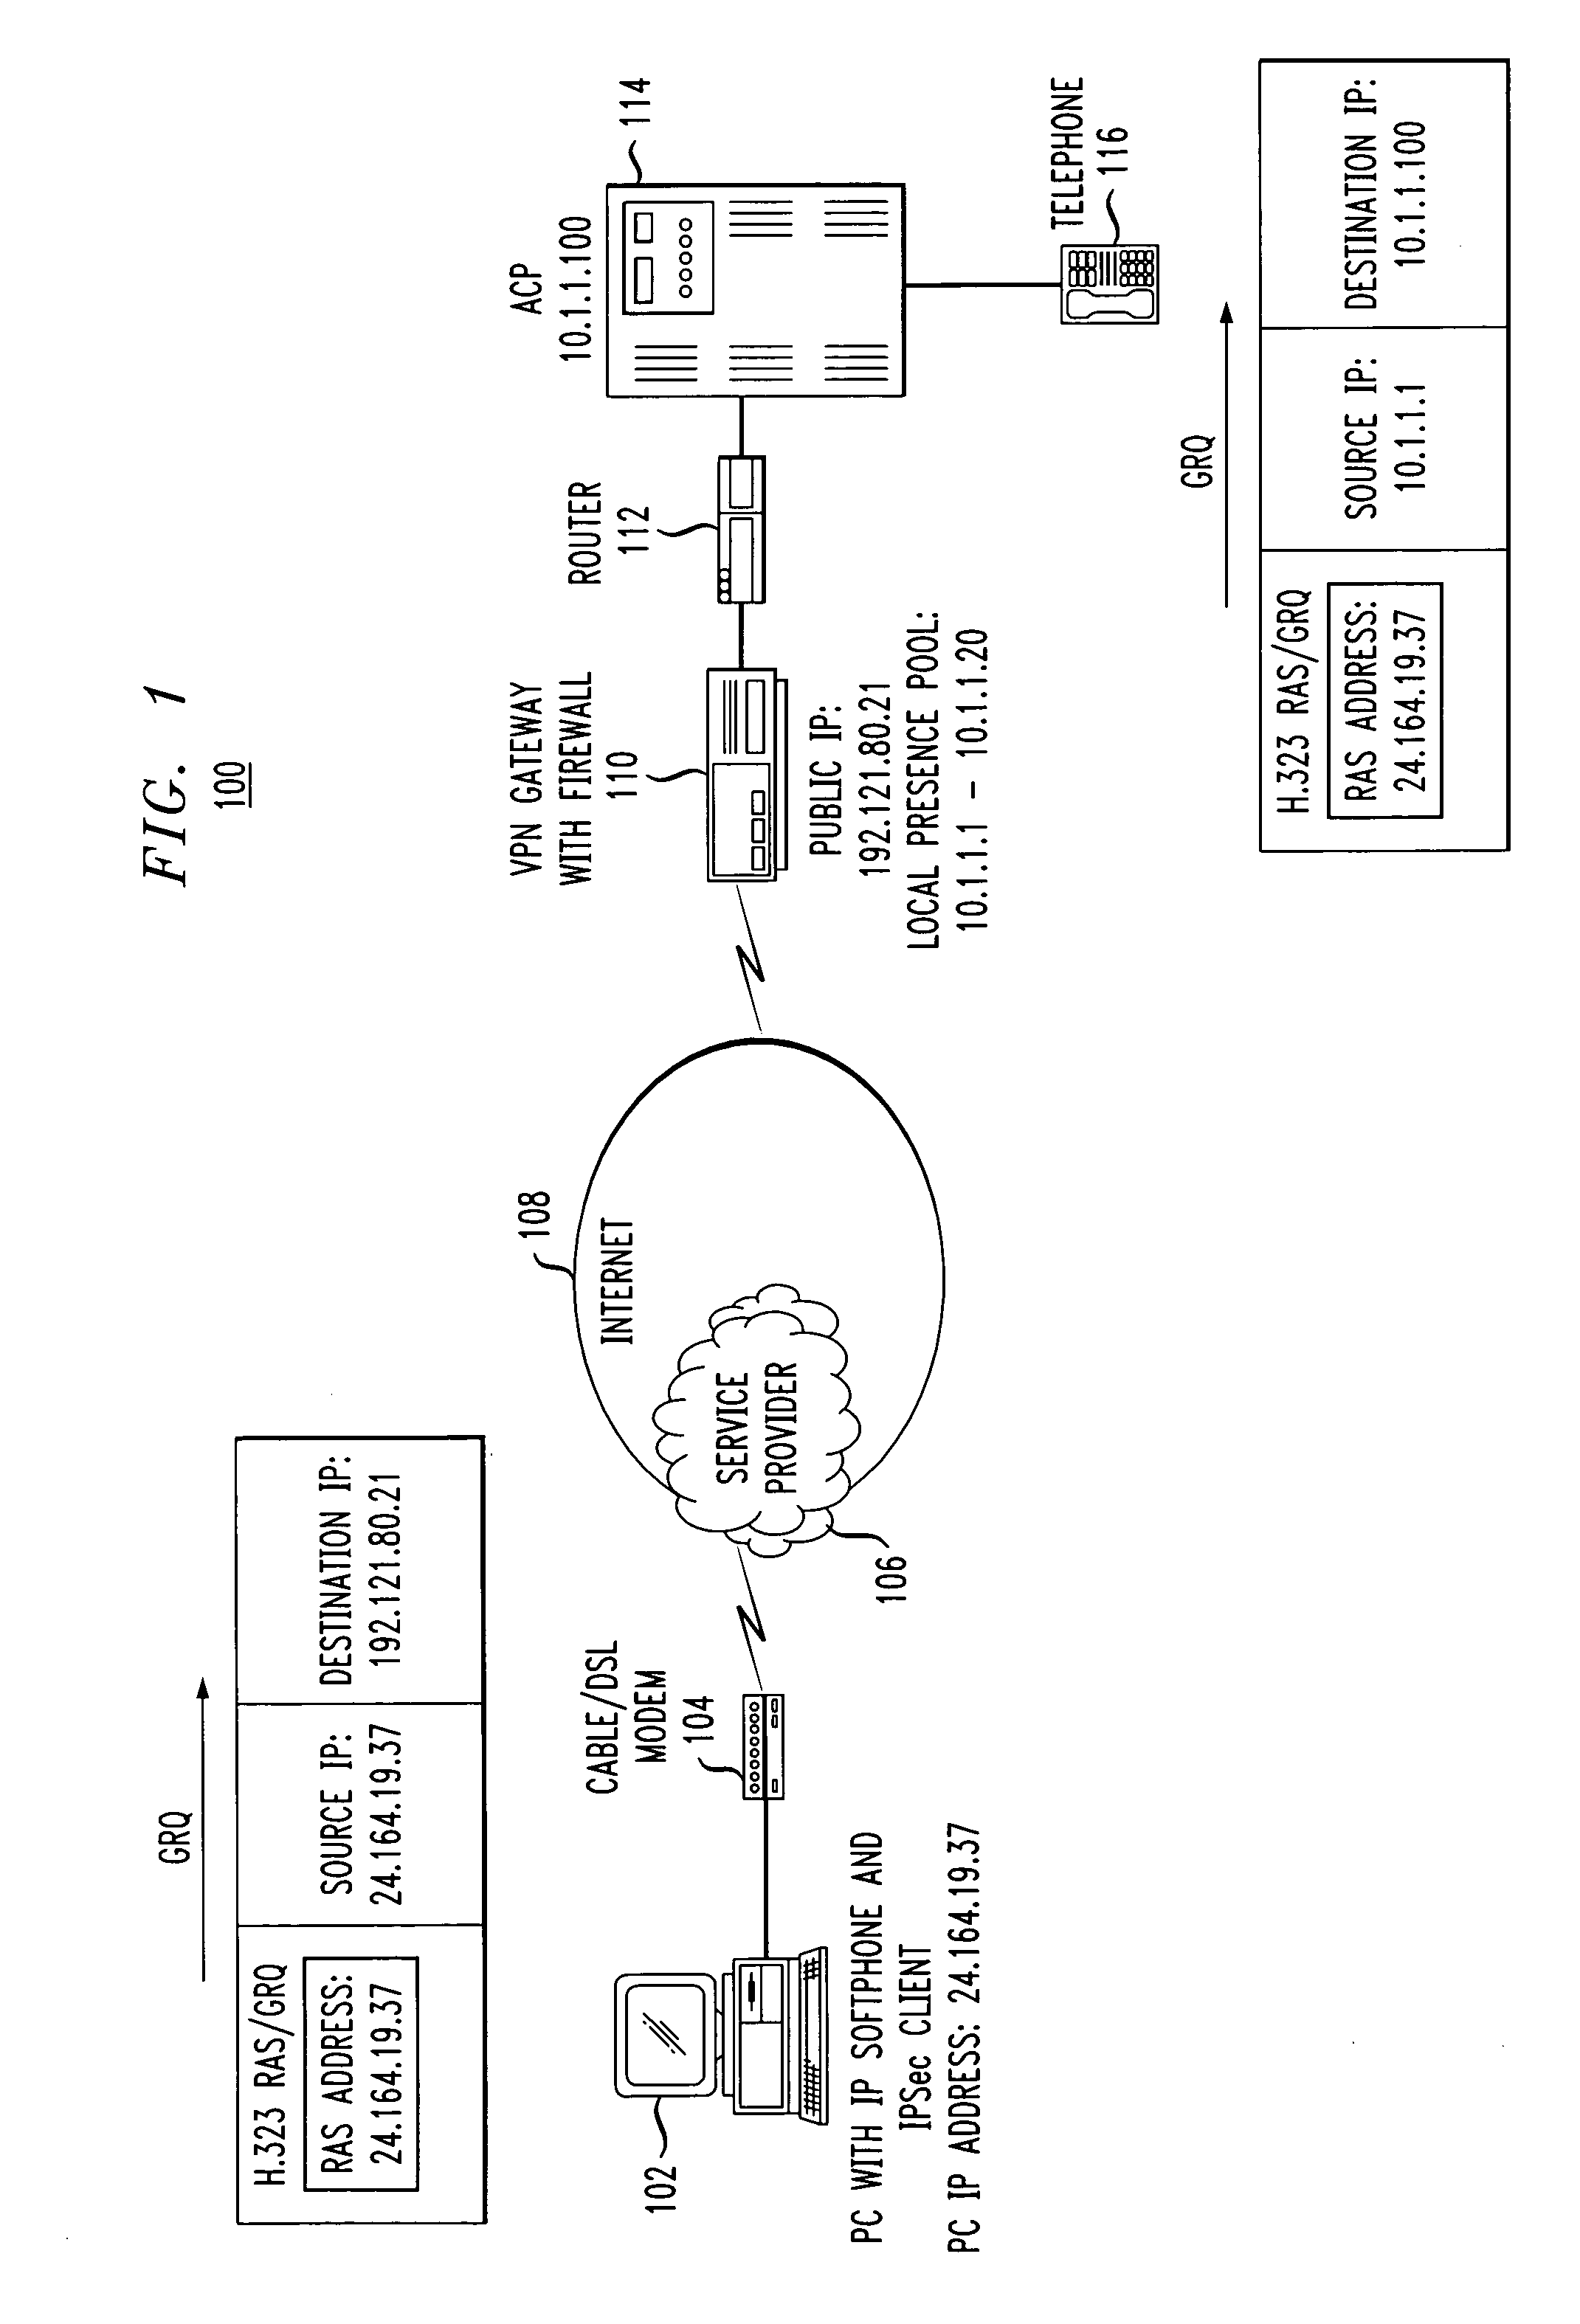 Determination of endpoint virtual address assignment in an internet telephony system